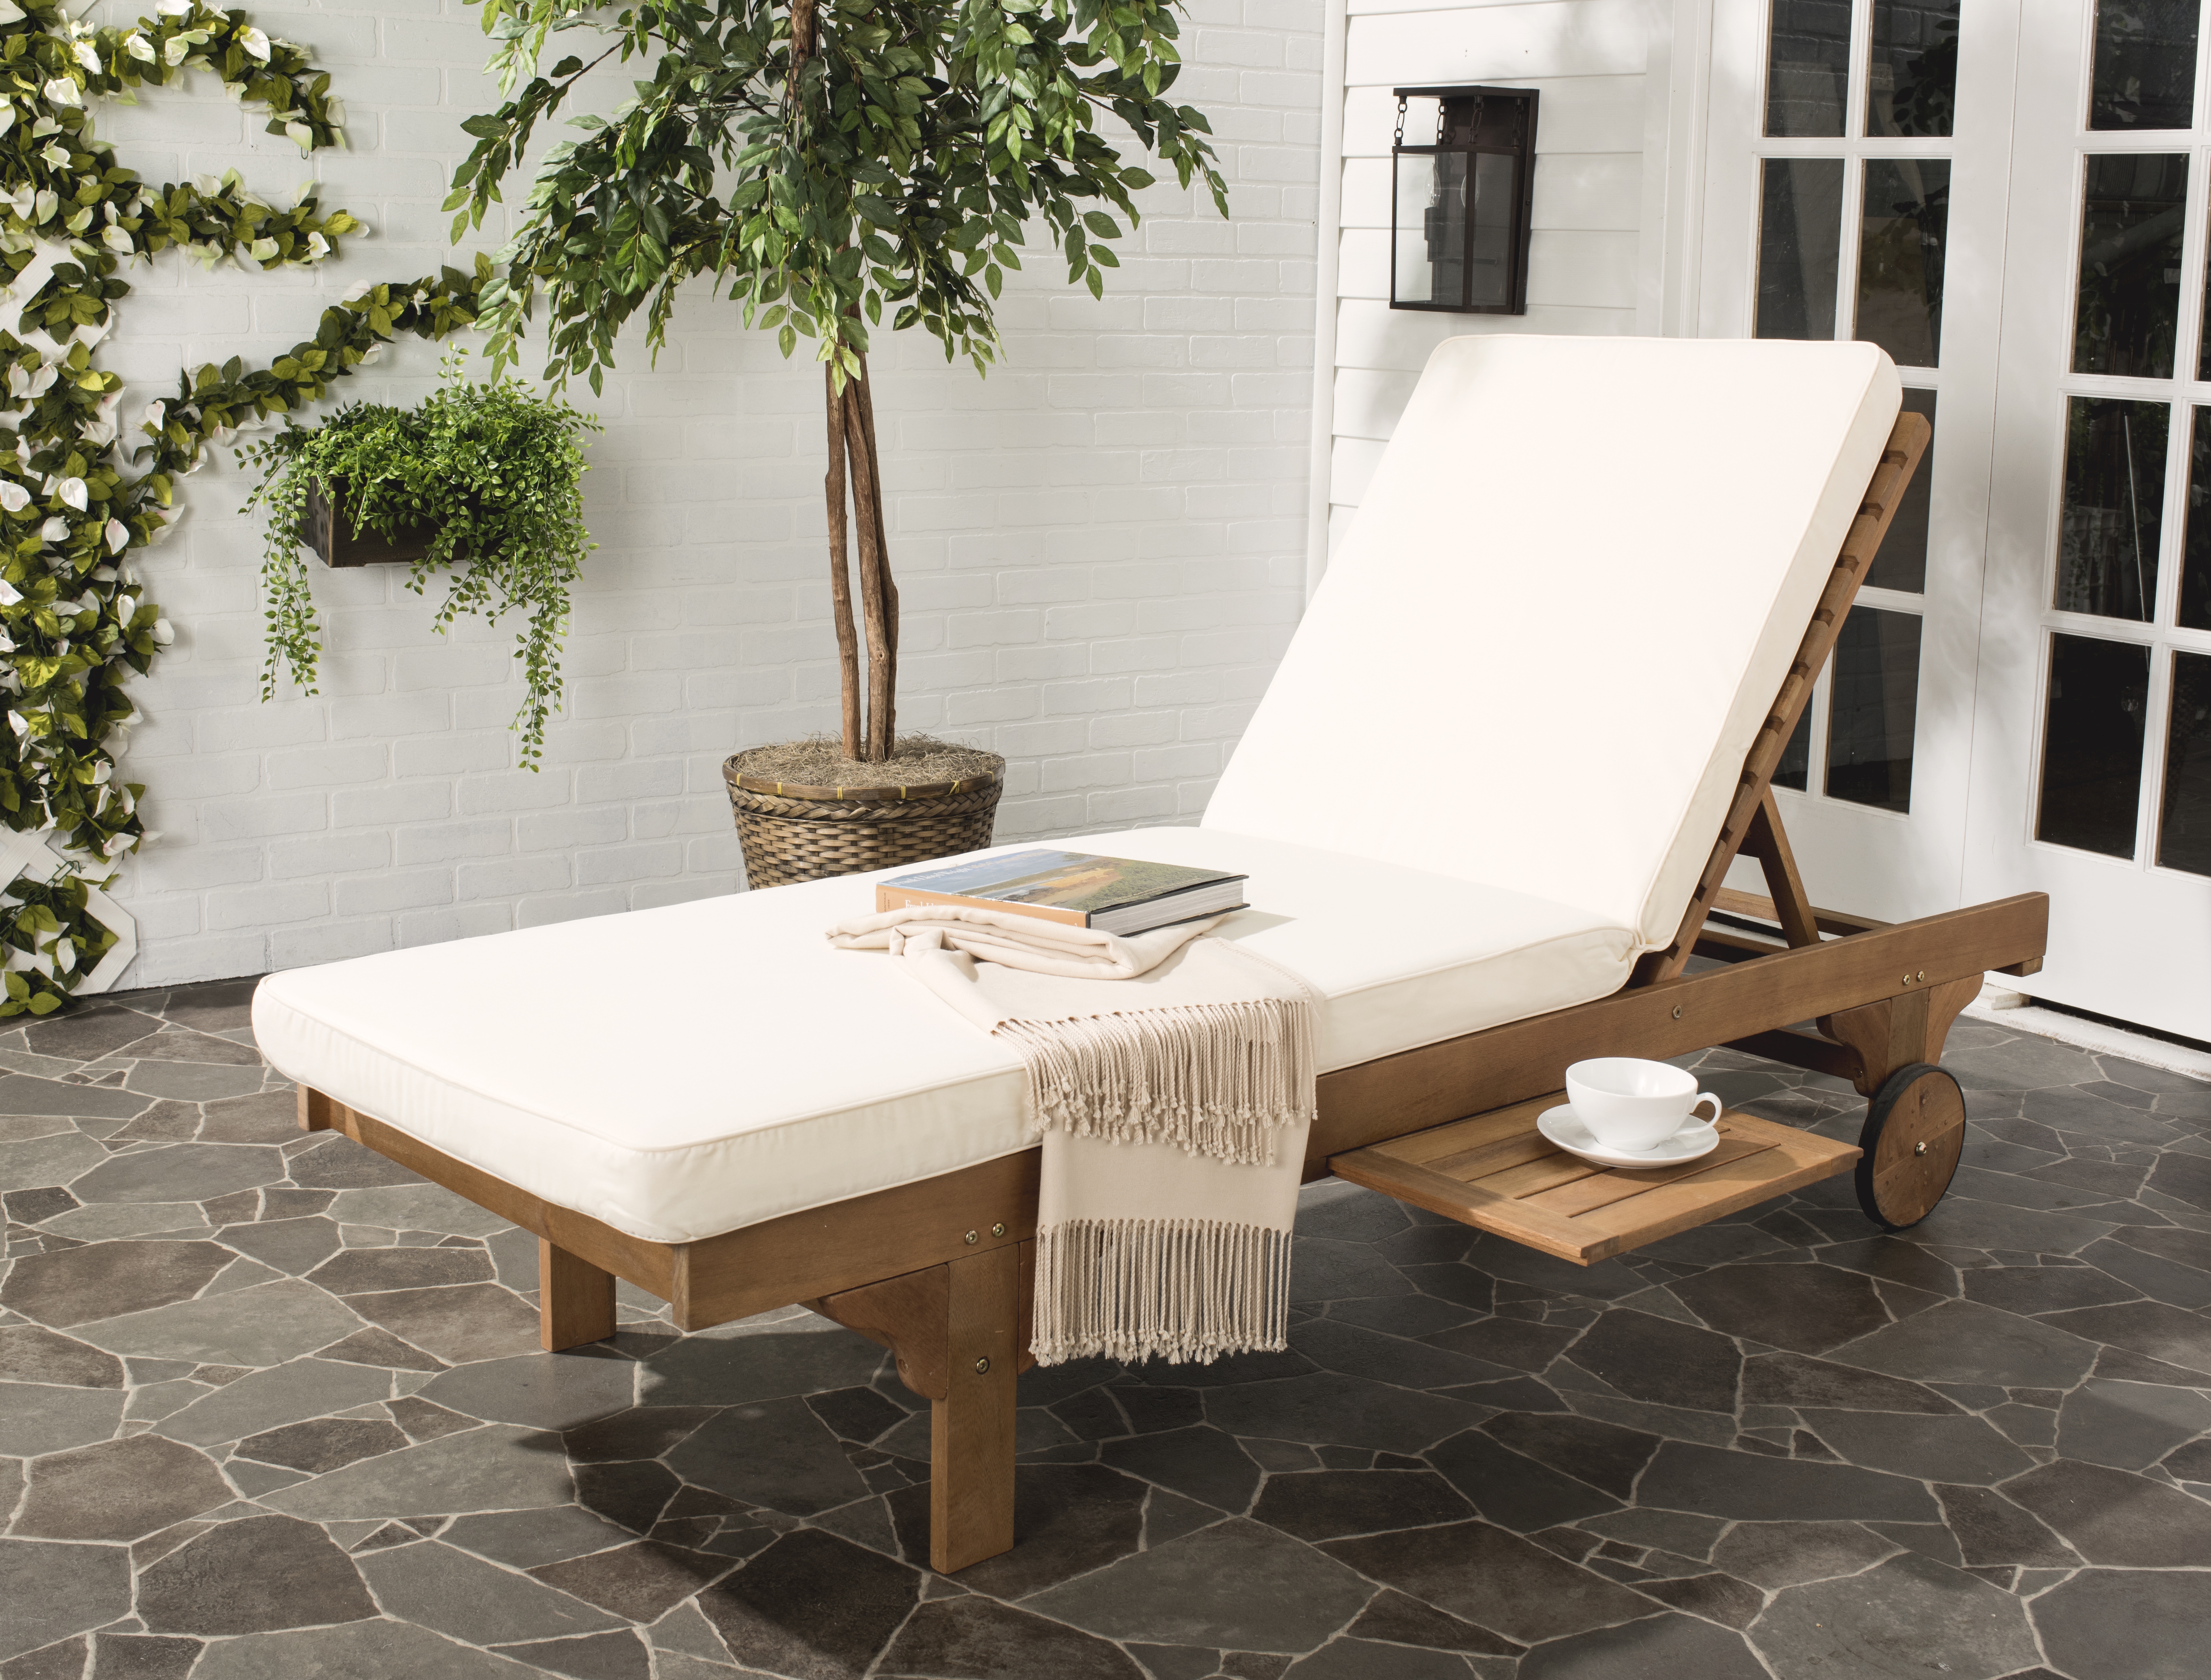 Newport Chaise Lounge Chair With Side Table - Natural/Beige - Arlo Home - Image 4